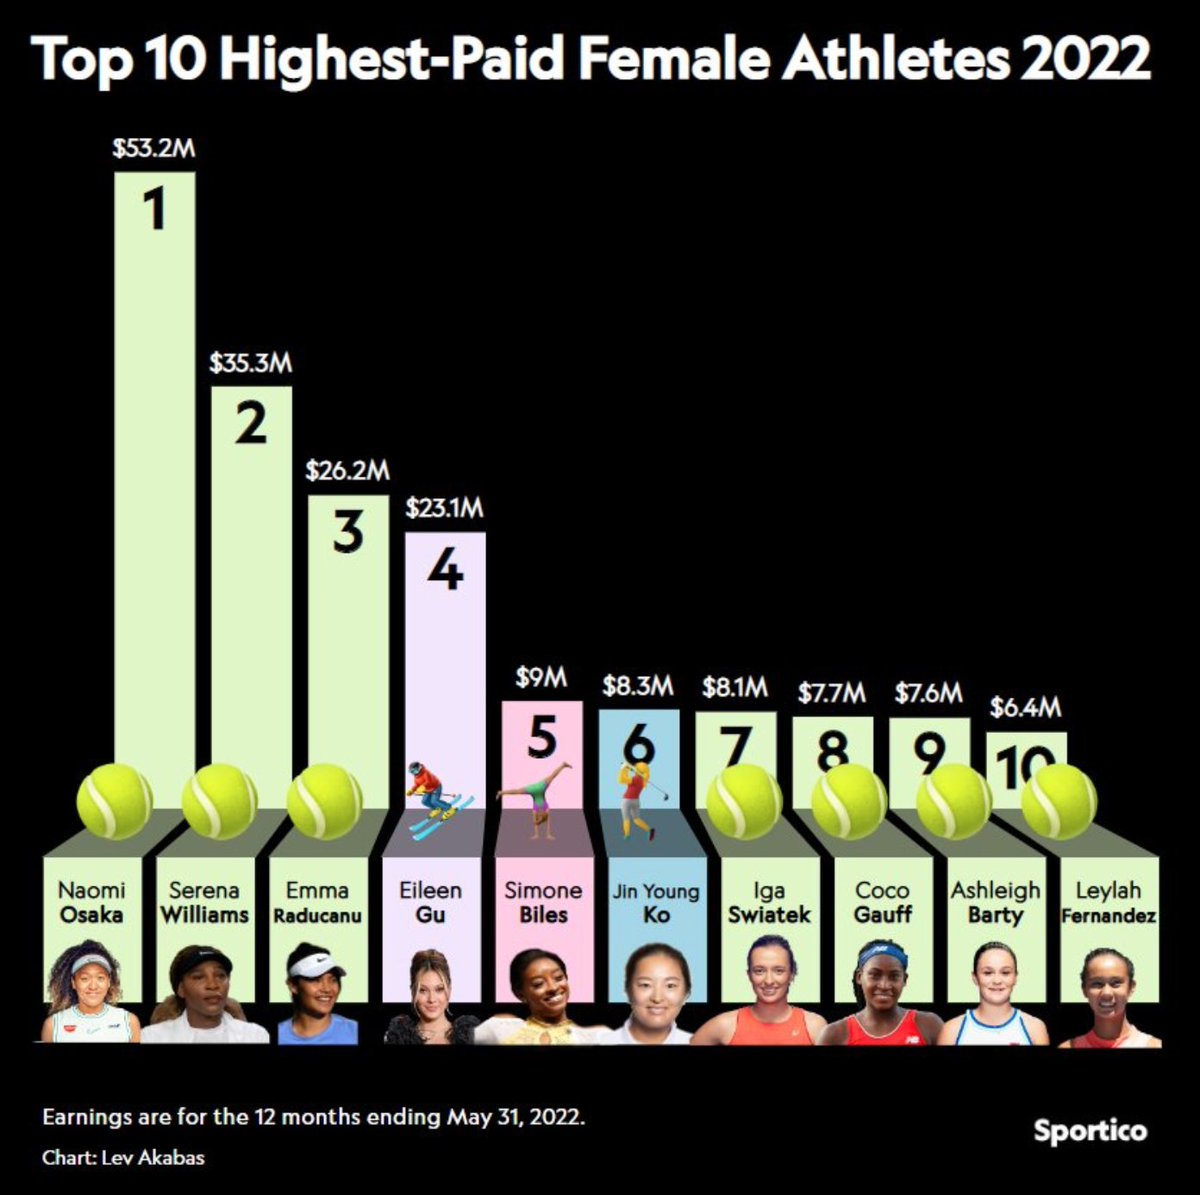 Canada's Leylah Fernandez ($6.4M in on-court winnings and endorsements) among the top paid female athletes in the world in 2022, according to @sportico. Naomi Osaka ($55.2M) led the way. Via @kbadenhausen and @LevAkabas. sportico.com/personalities/… @leylahfernandez 🎾🇨🇦